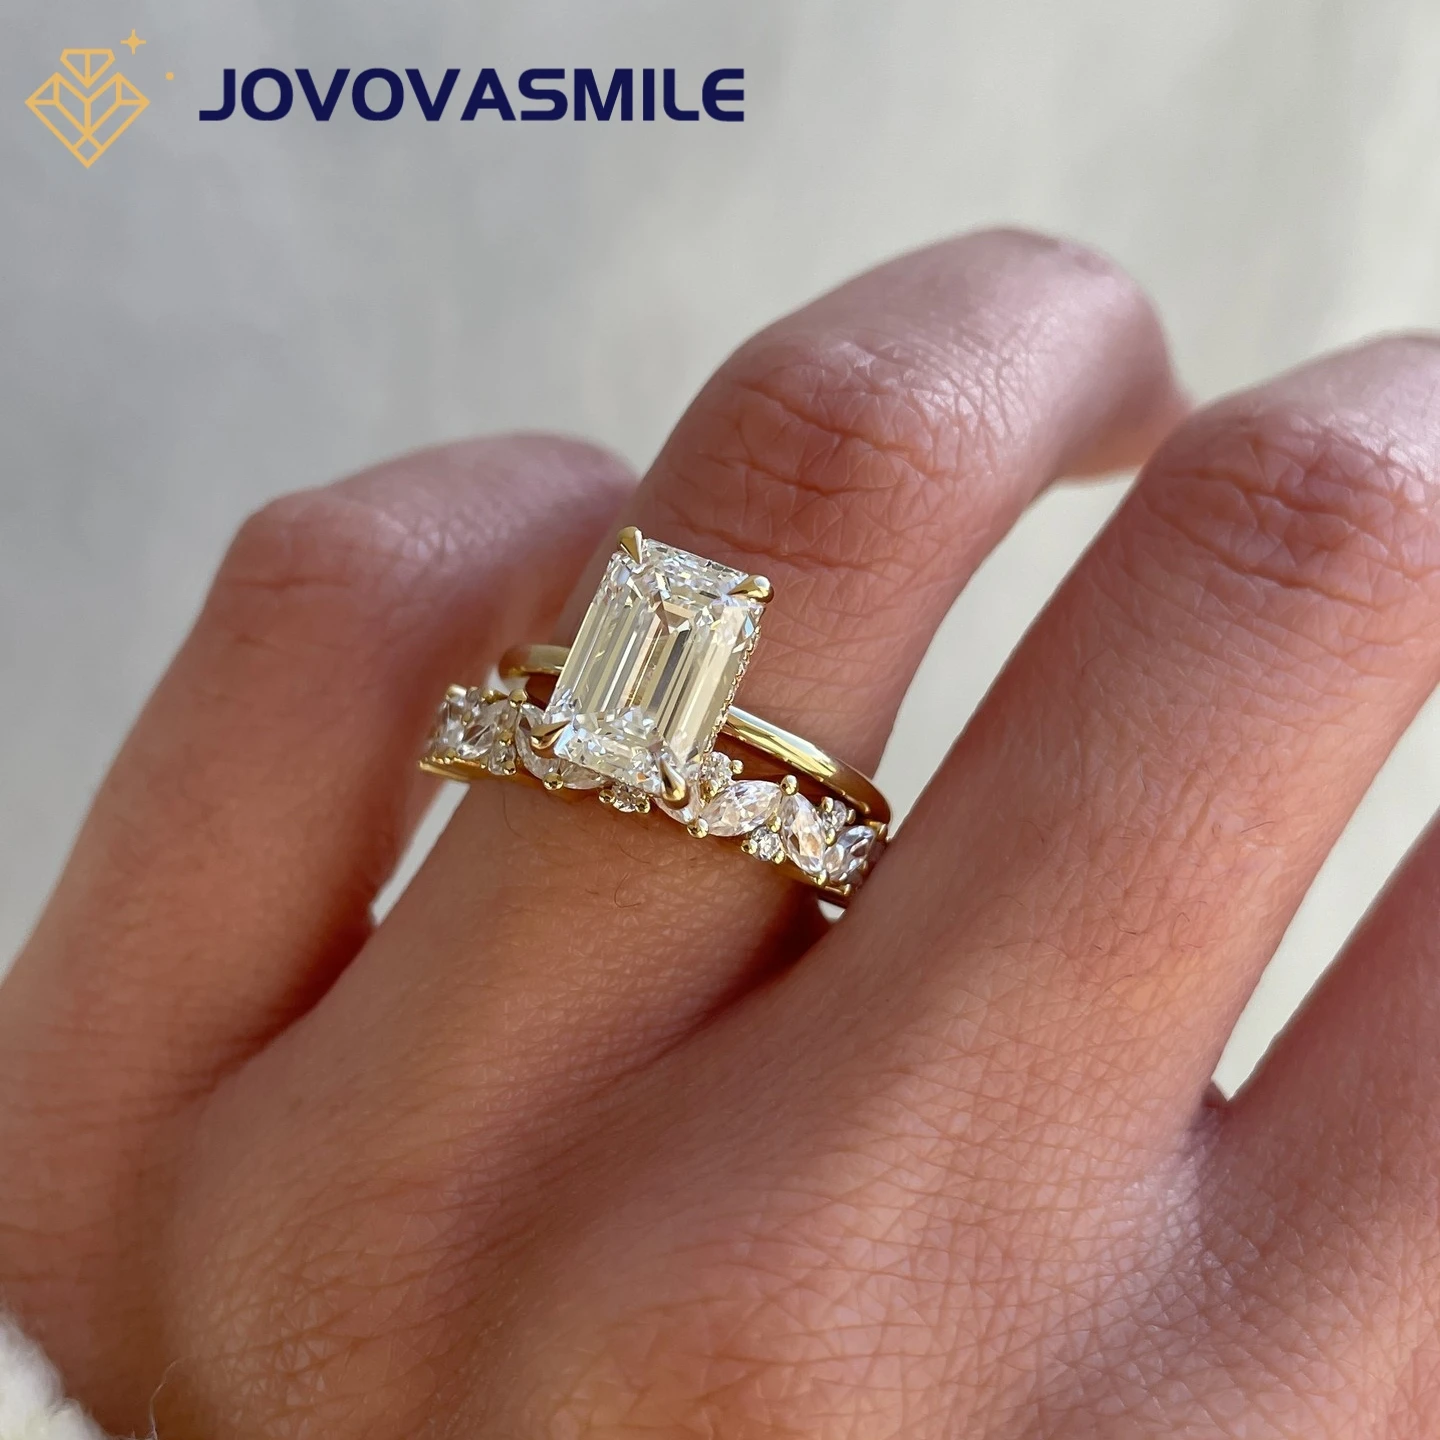 

JOVOVASMILE Jewelry 3 Carat Emerald Moissanite Ring Sets 2 Rings 18K Yellow Gold 9.5*7mm Cushion Cut Fine Jewelry With GRA CE